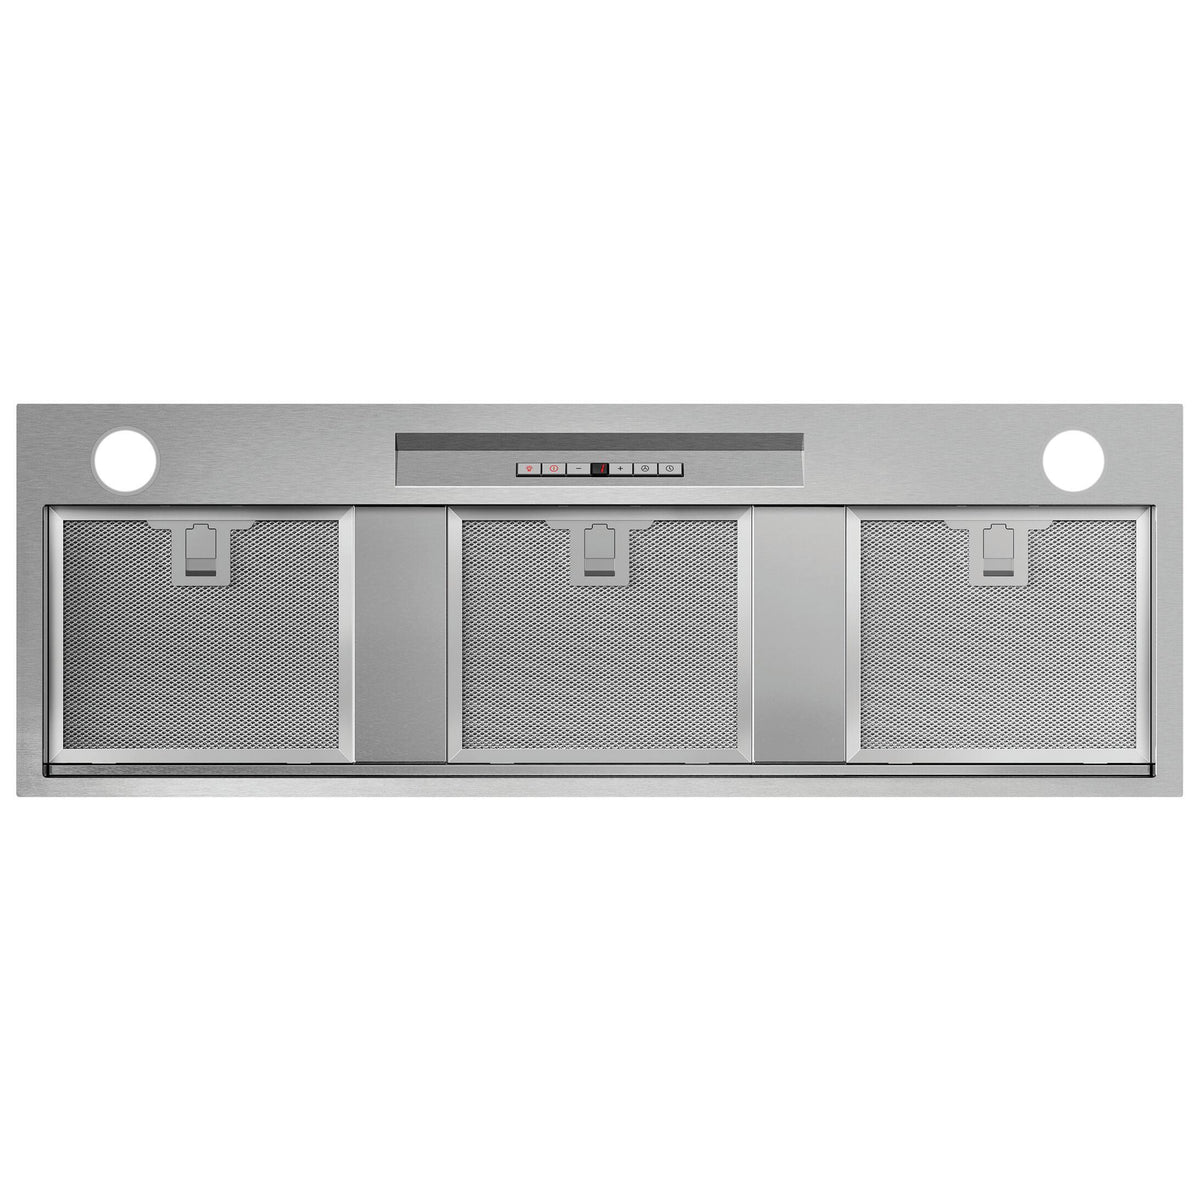 36-inch Series 5 Built-in Hood Insert with LED Lighting HP36ILTX2 IMAGE 1